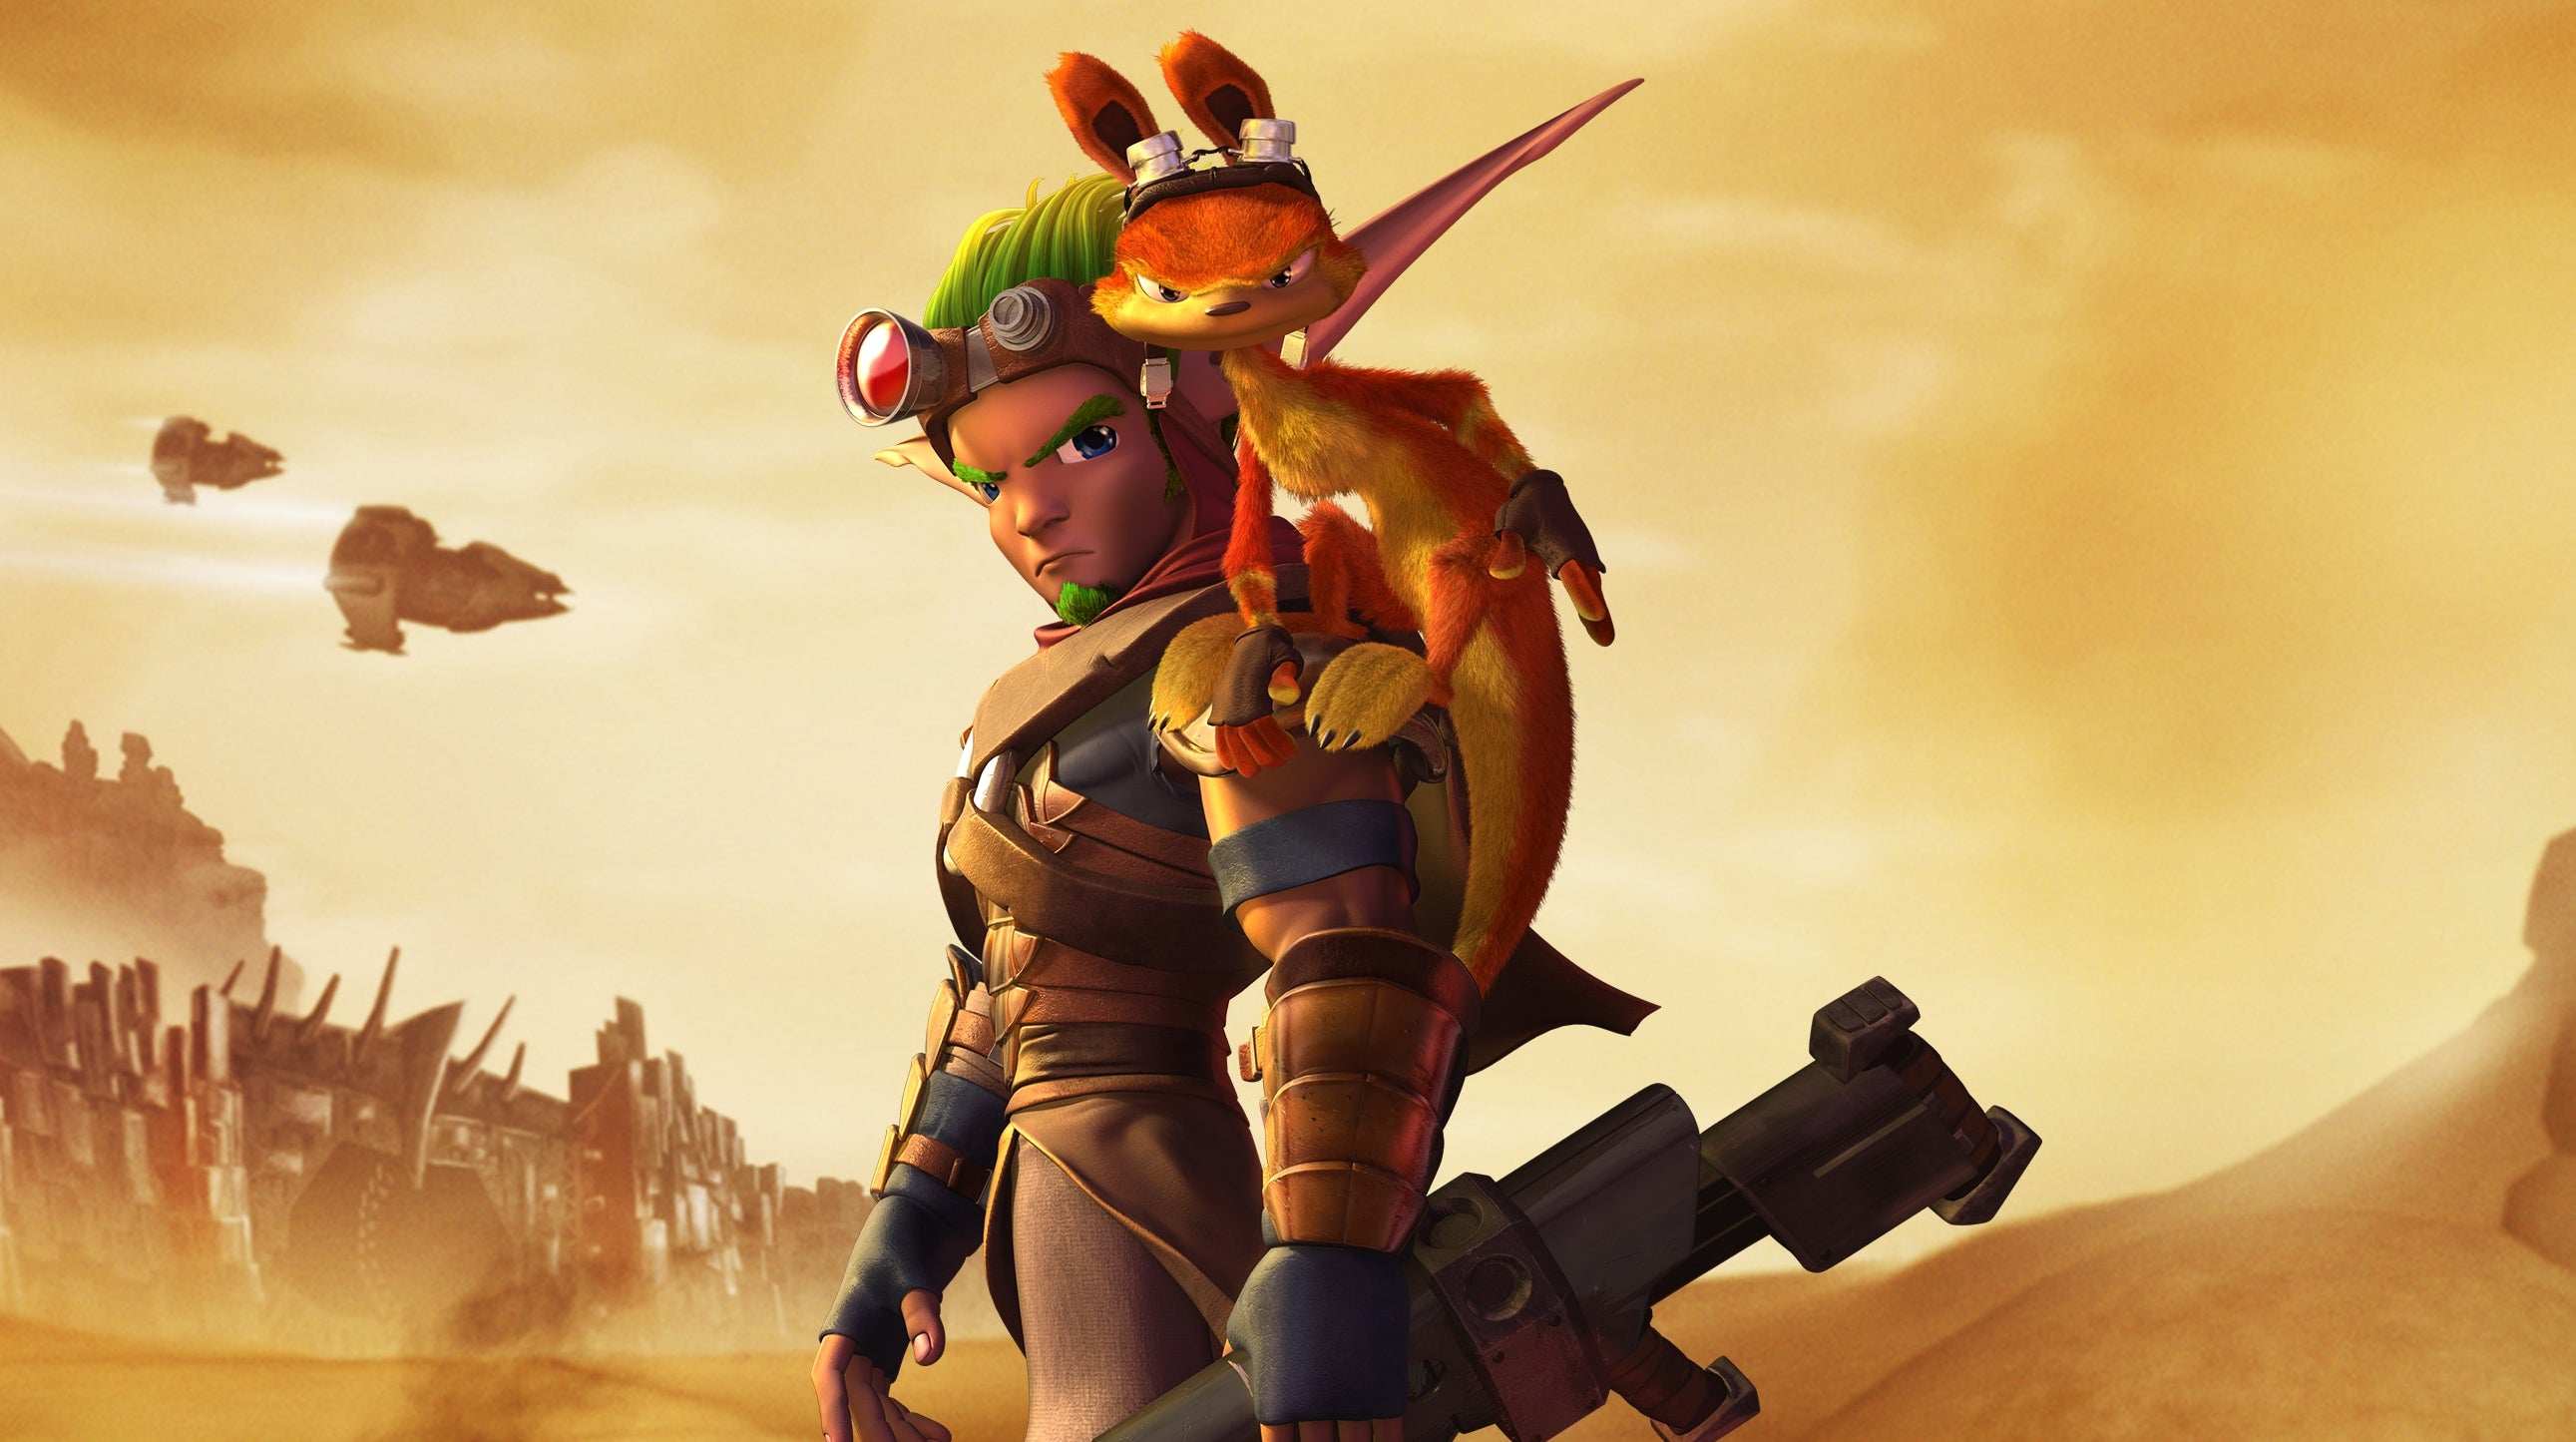 Uncharted movie director reveals his next gig is a Jak and Daxter film.